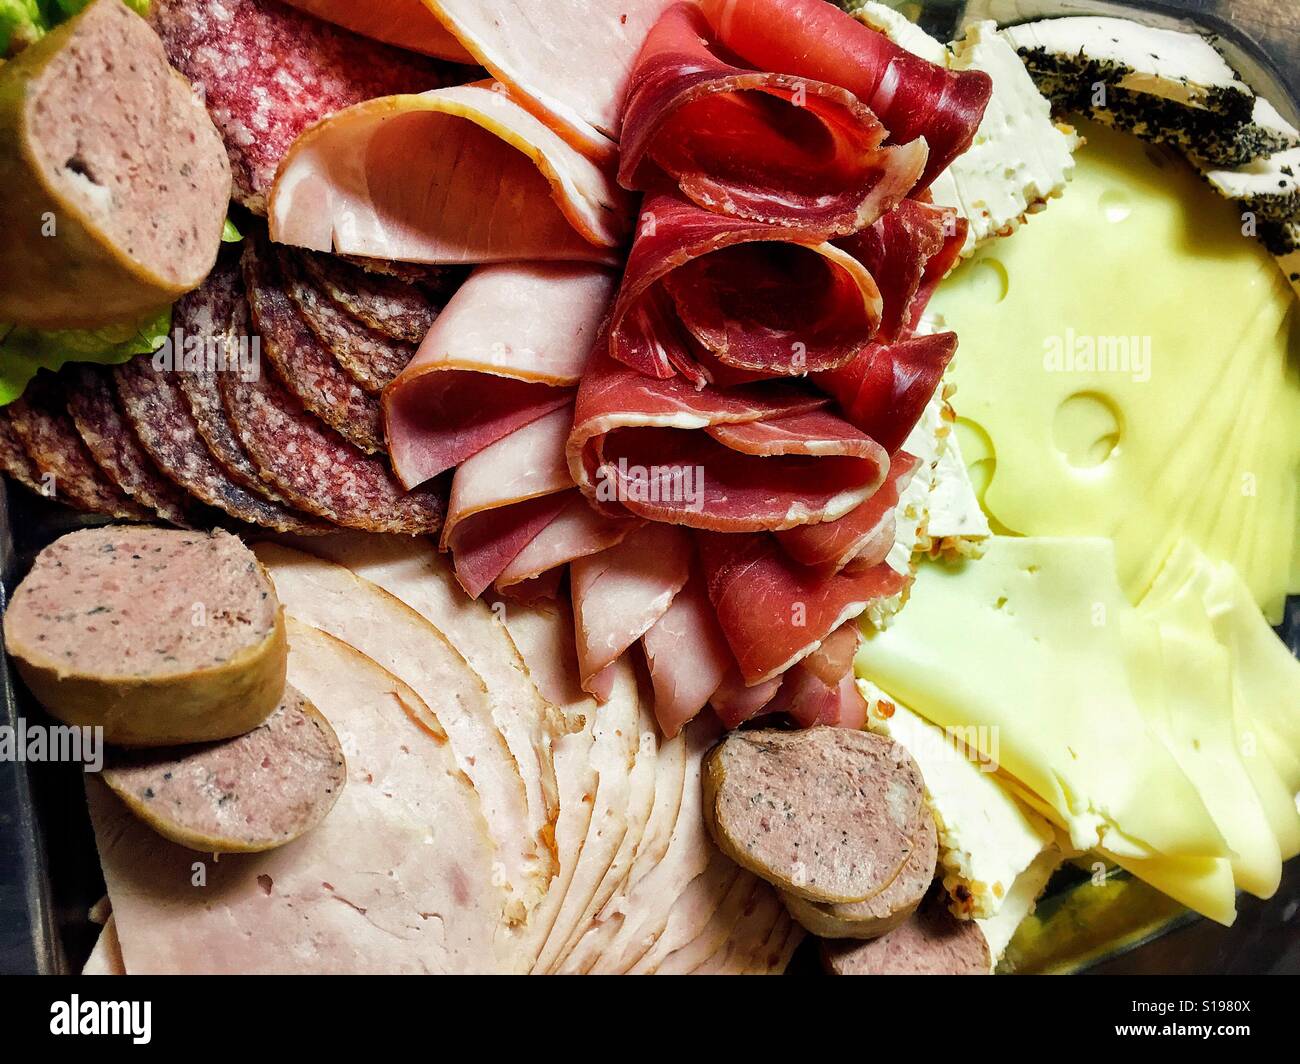 Breakfast plate with different types of cheese and meat cuts Stock Photo